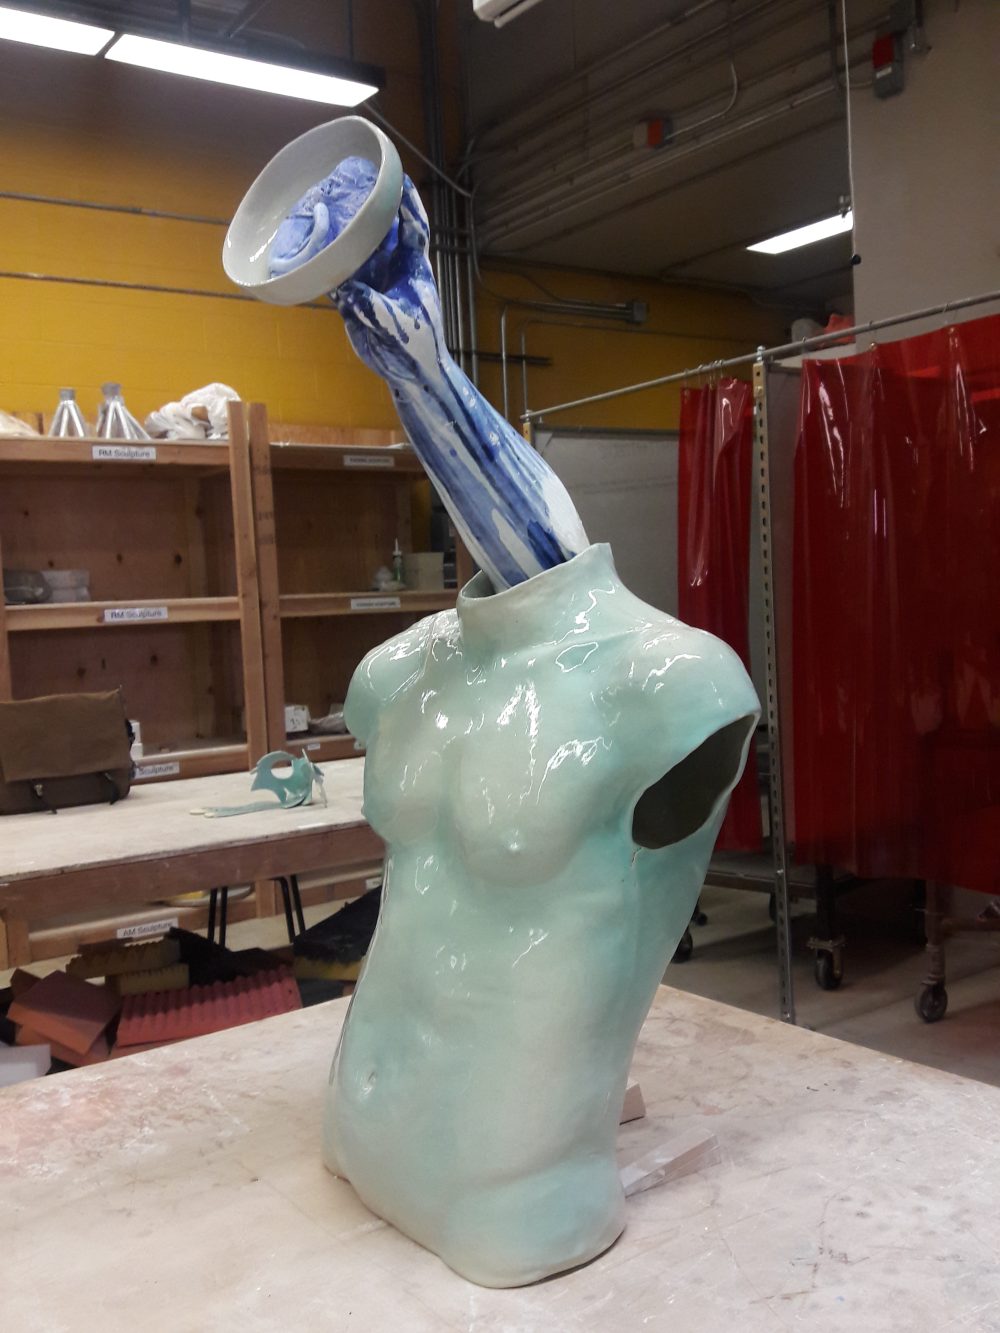 A not so small sculpture of a light blue torso with a blue and white arm coming out of the neck and holding a ceramic bowl with an ear in it.